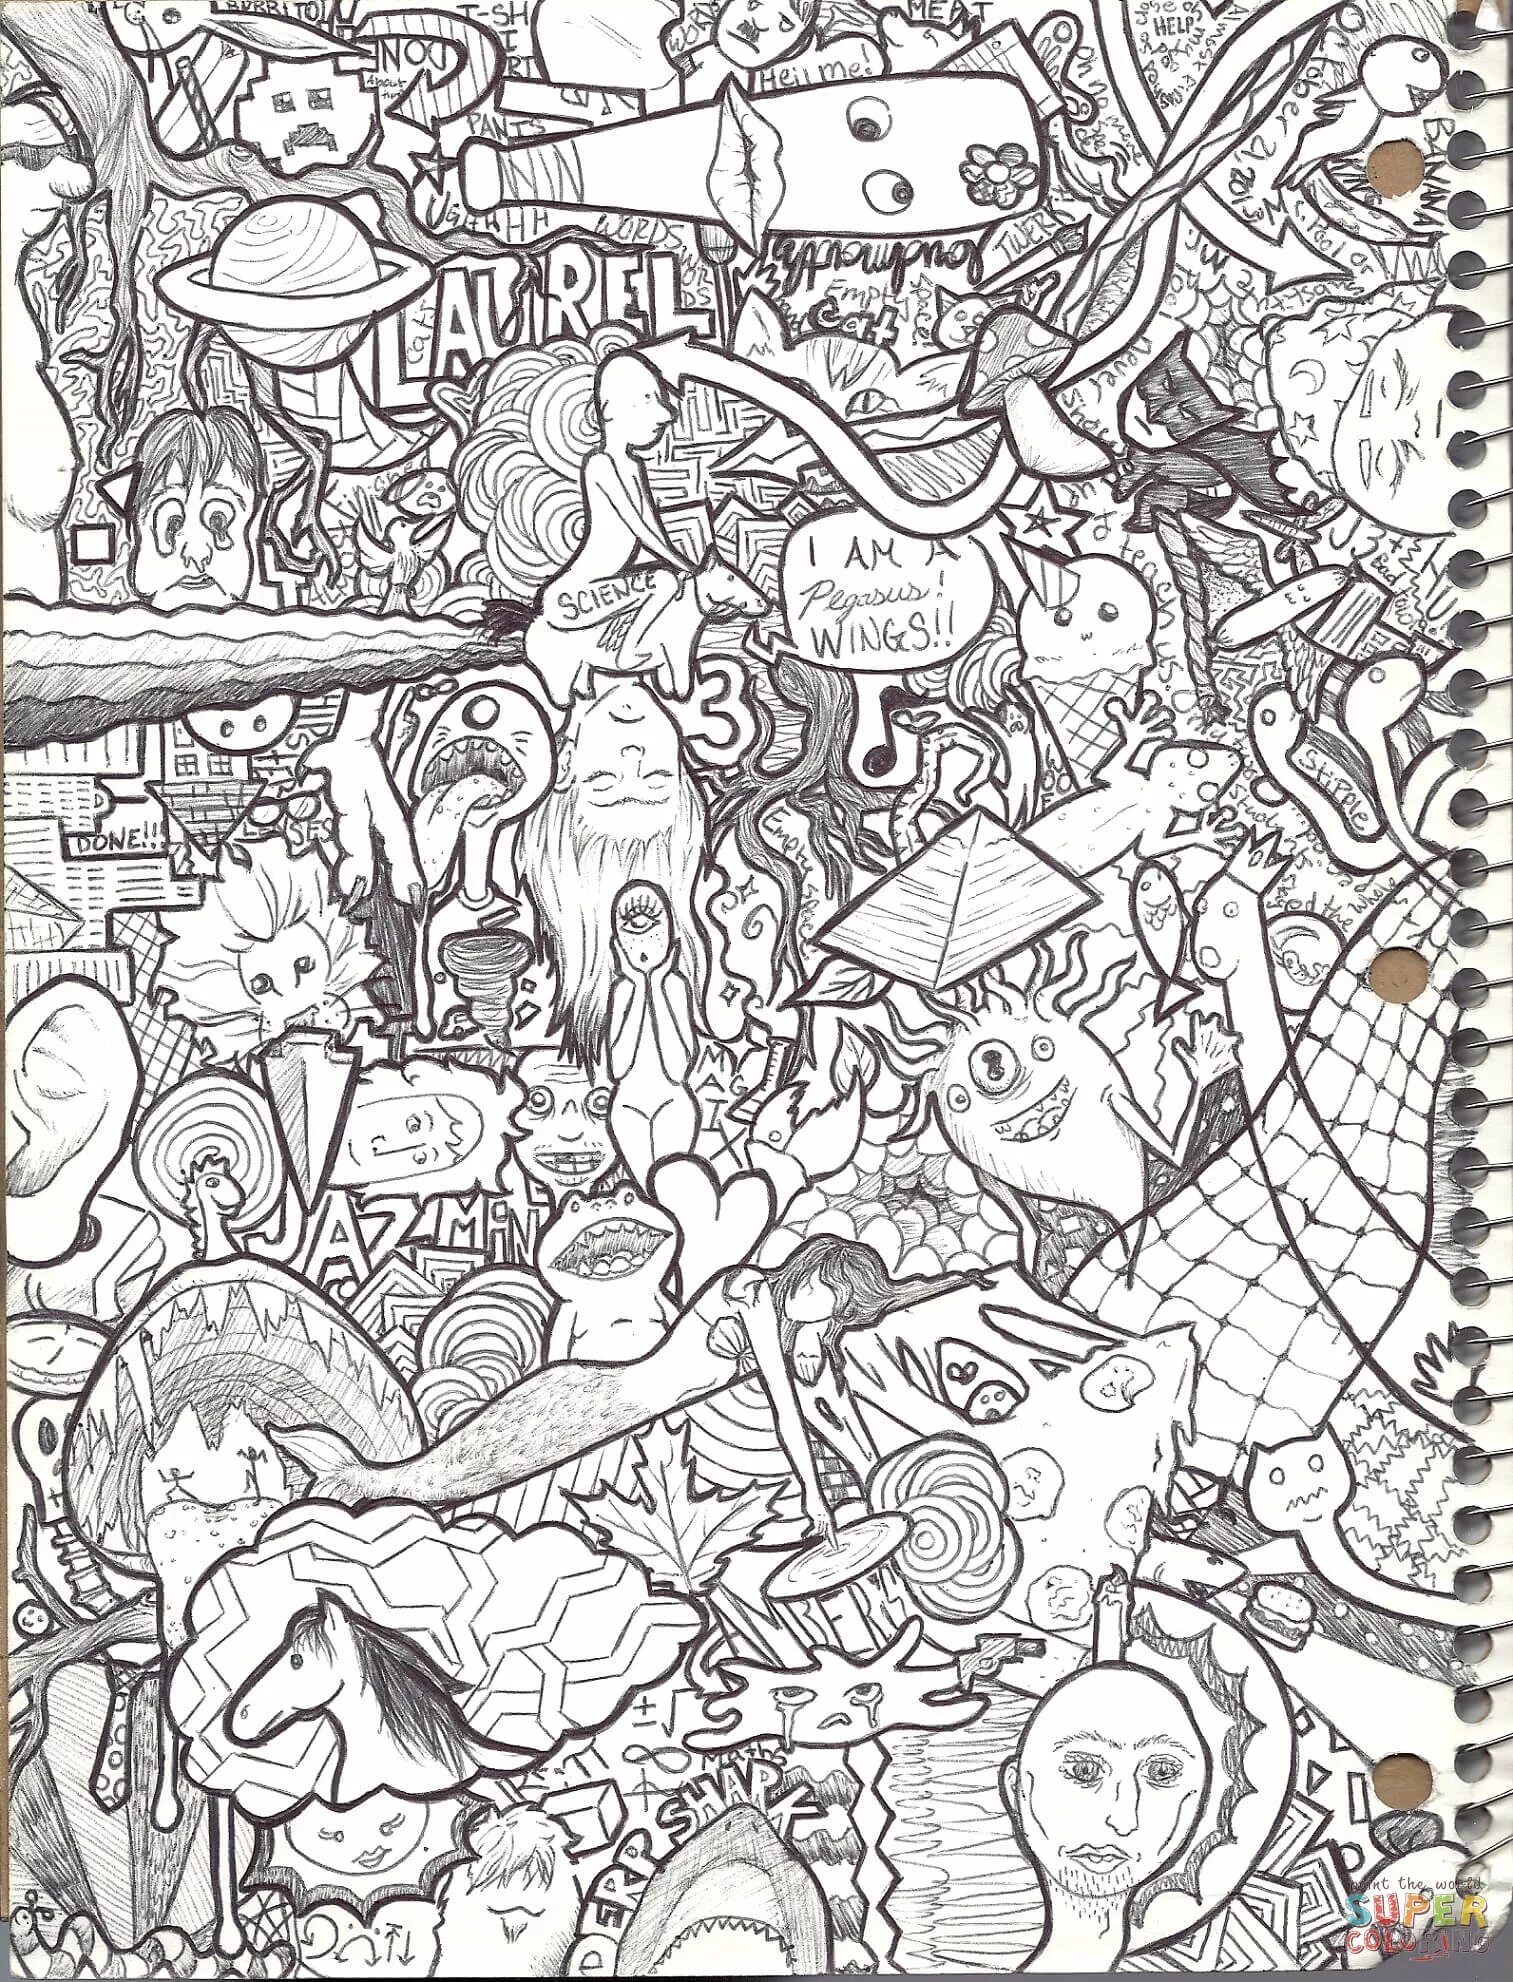 Coloring-mania coloring page collage